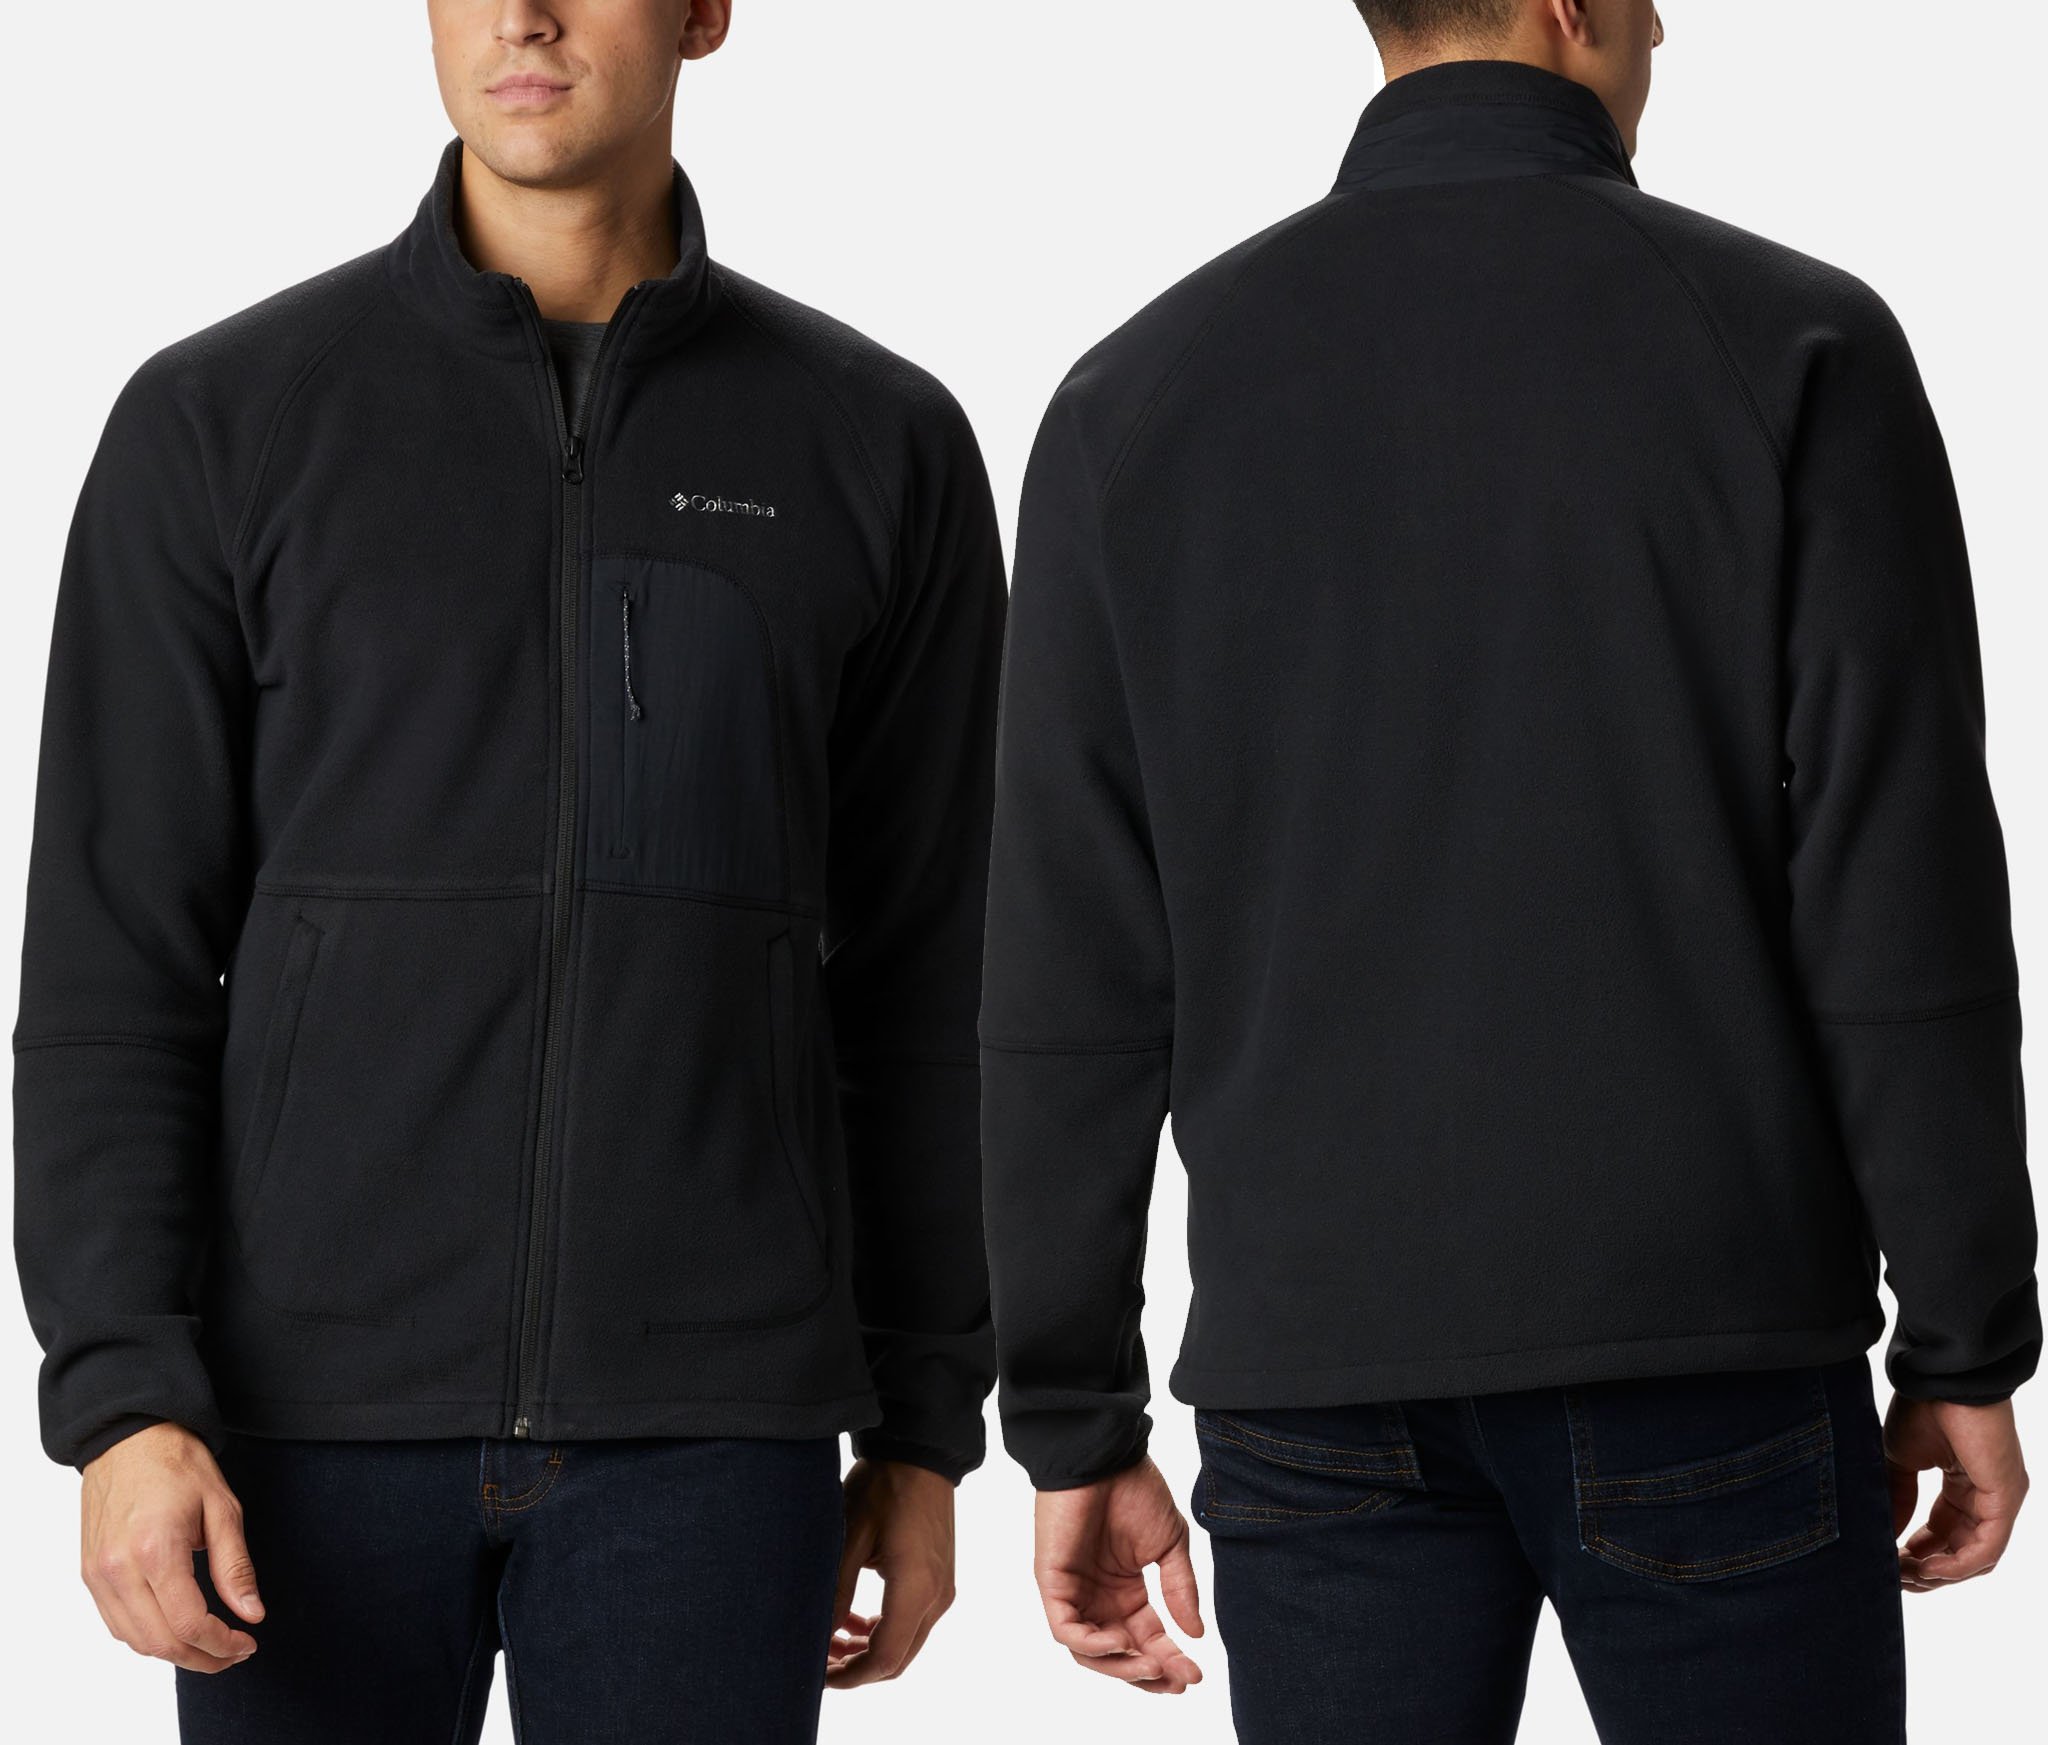 The Rapid Expedition jacket combines design with functionality as it boasts a lot of zipped pockets